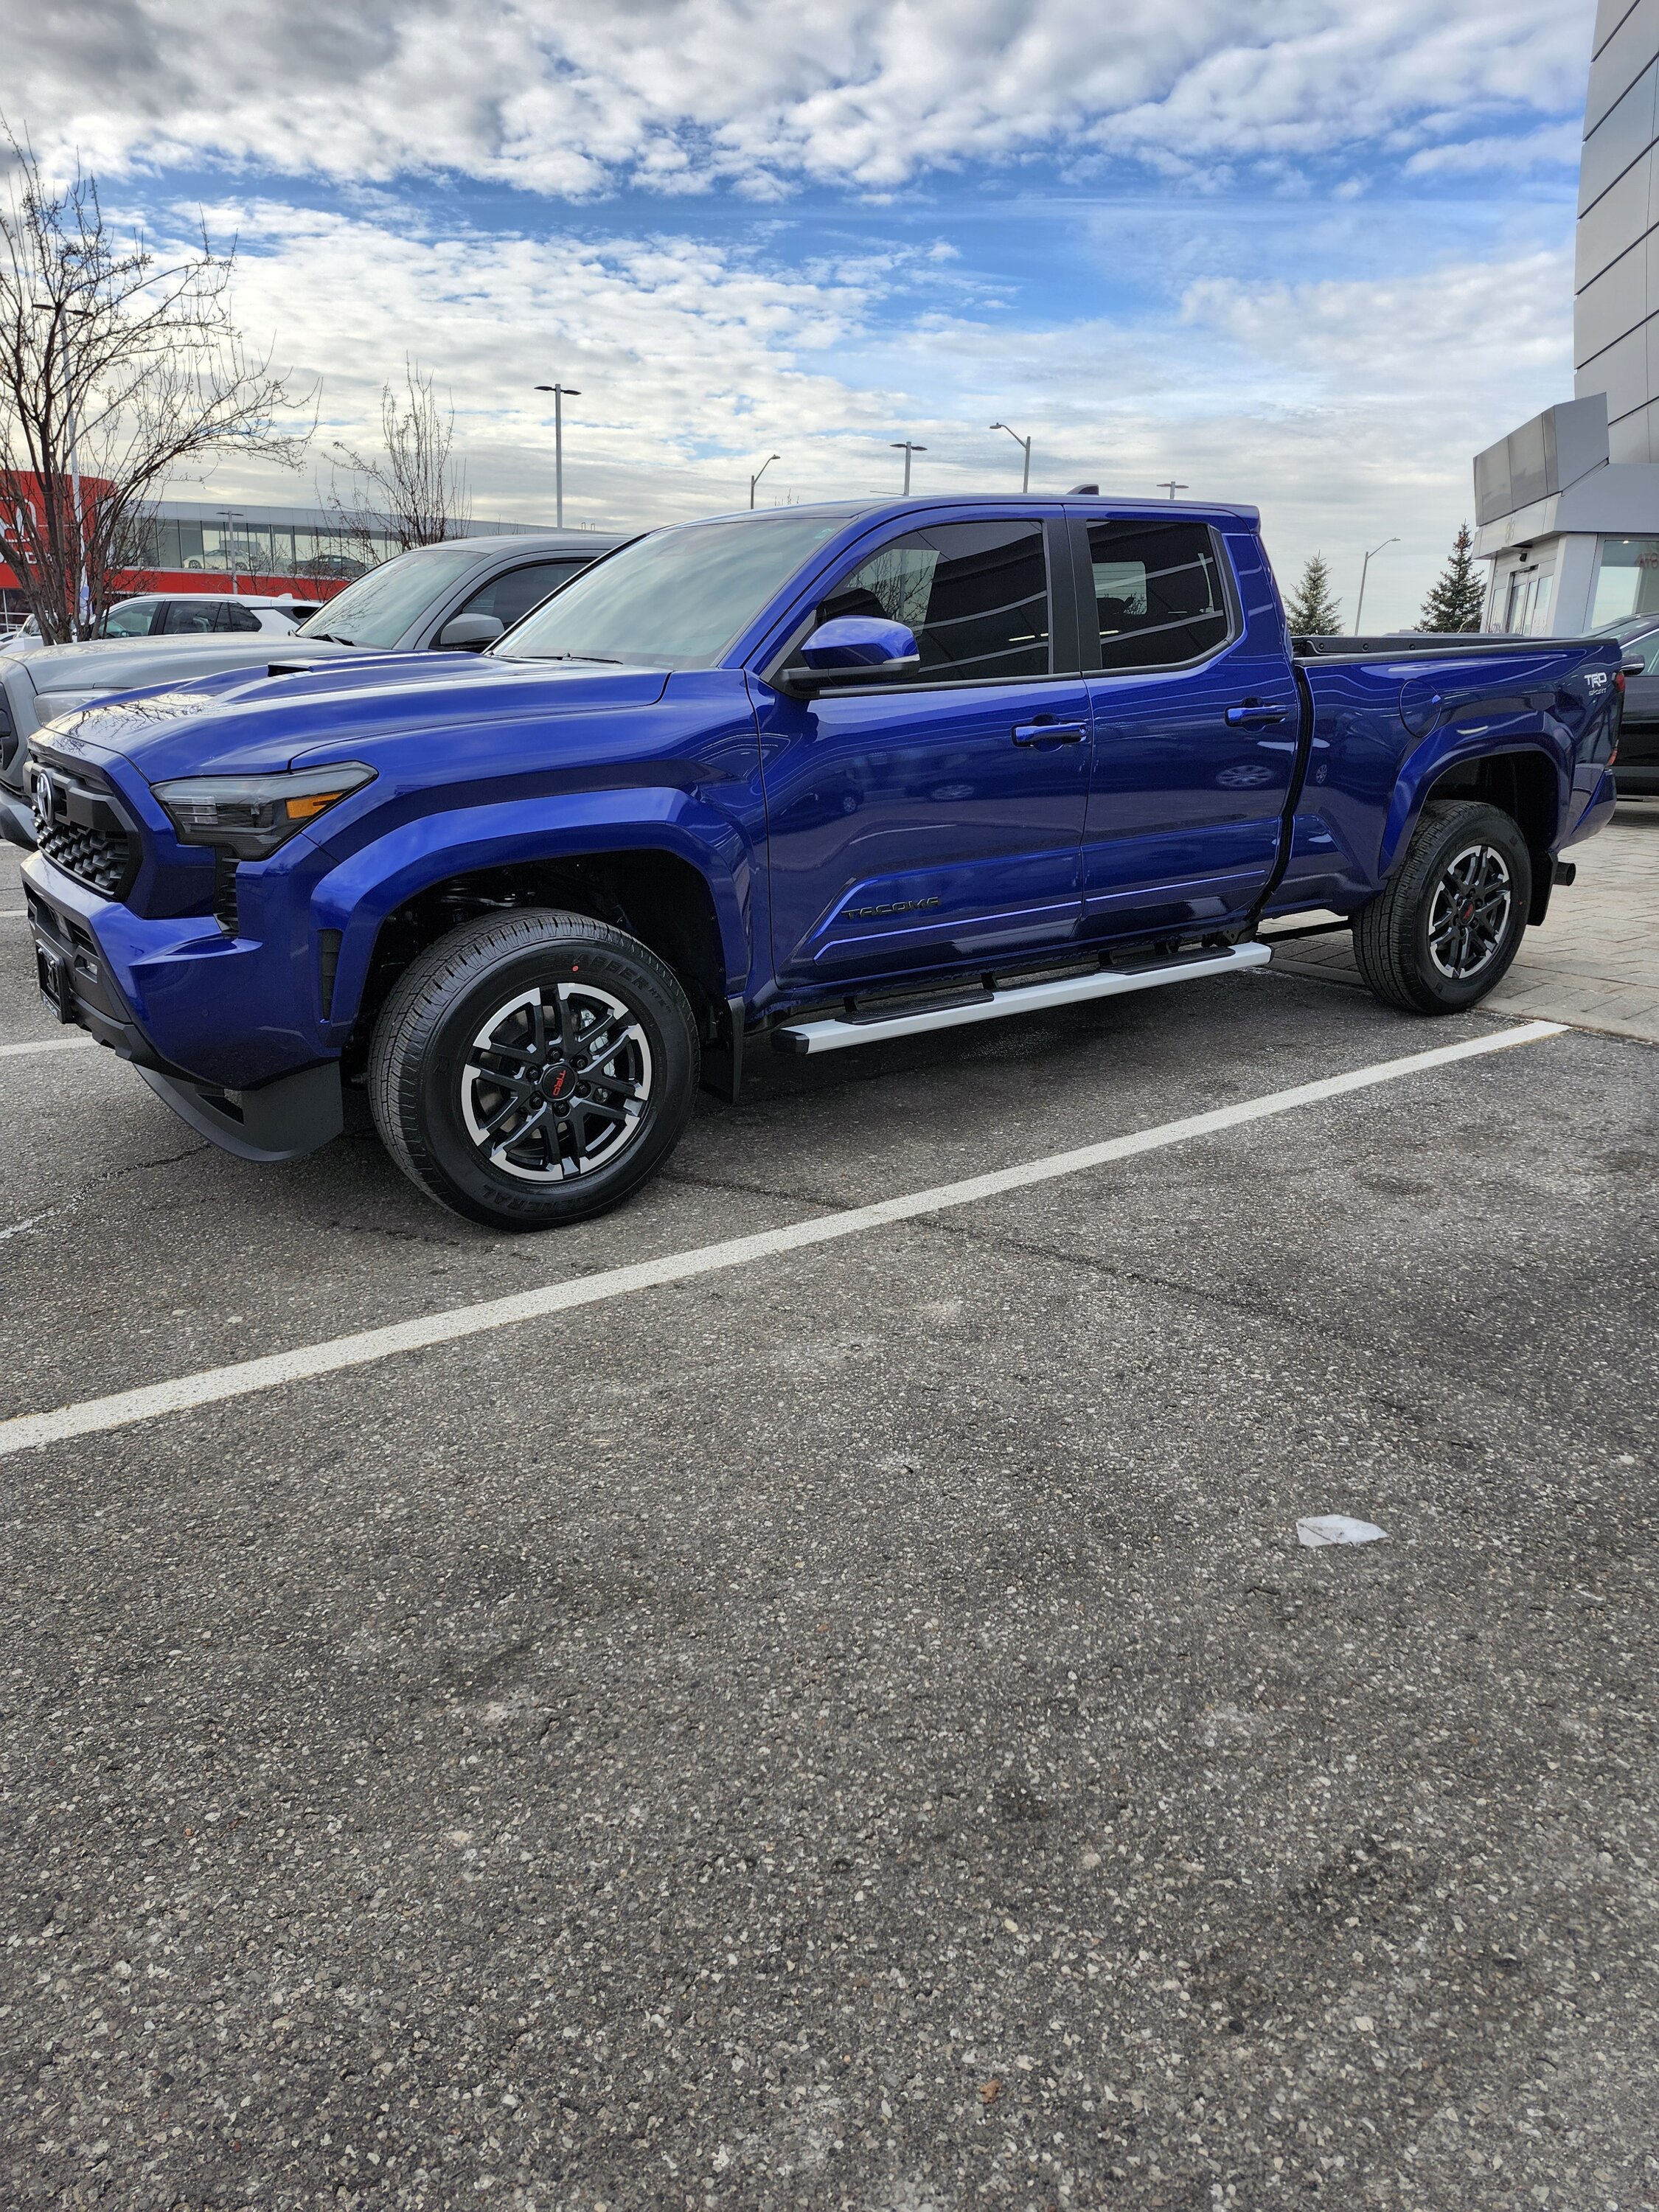 2024 Tacoma 1st month of 2024 Tacoma ownership: flawless with no issues 20240207_092338